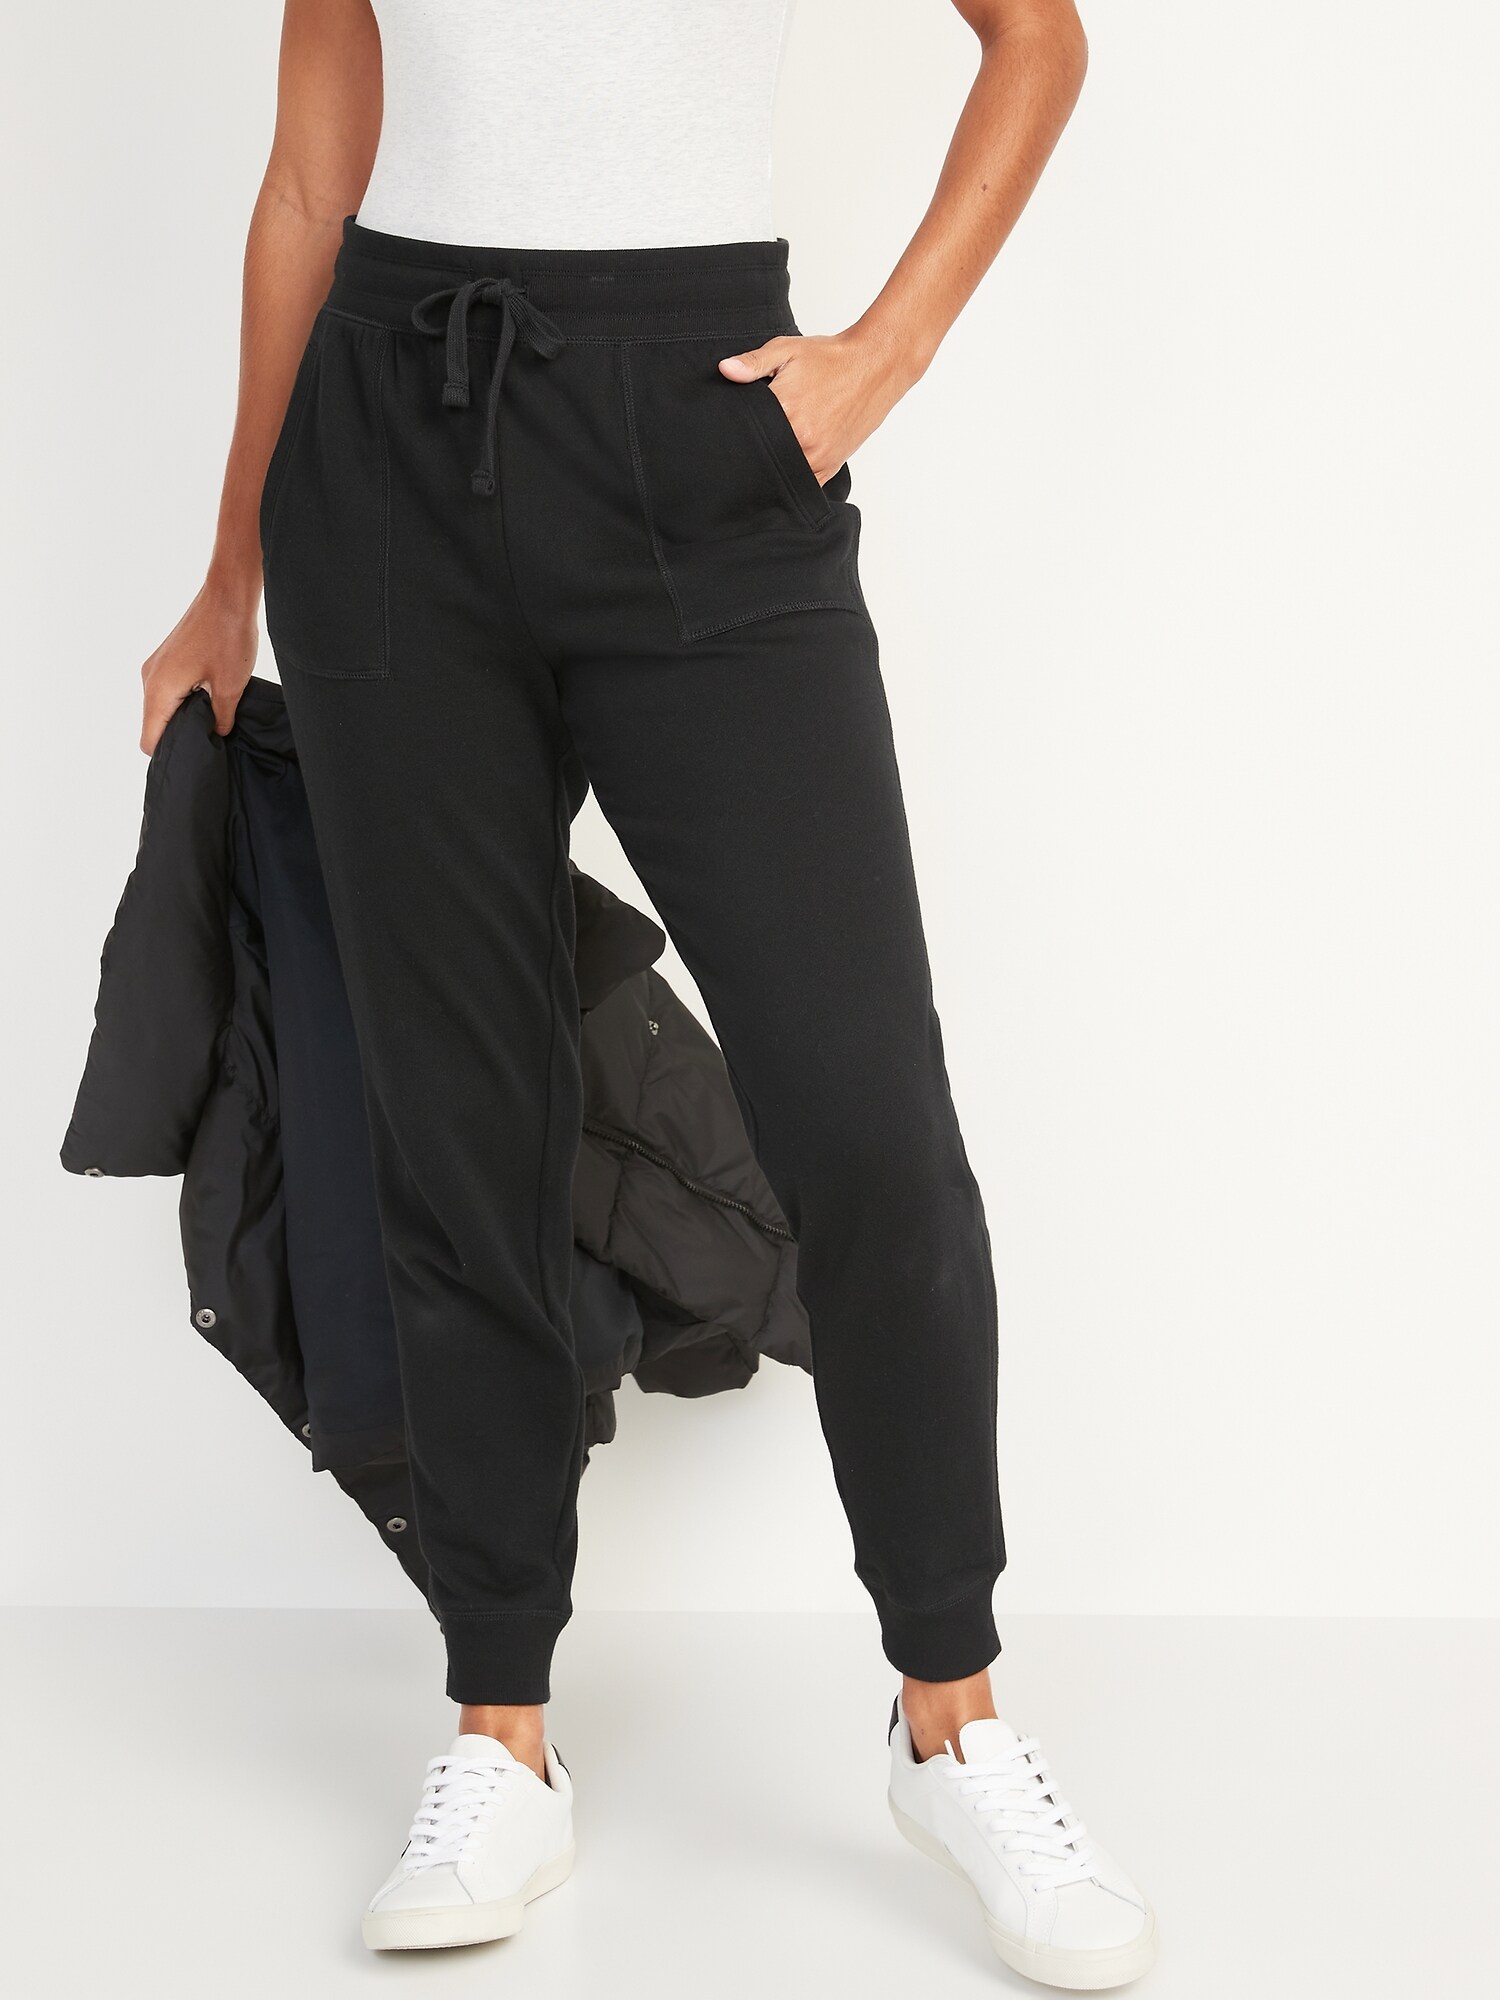 High-Waisted Garment-Dyed Street Jogger Pants for Women | Old Navy